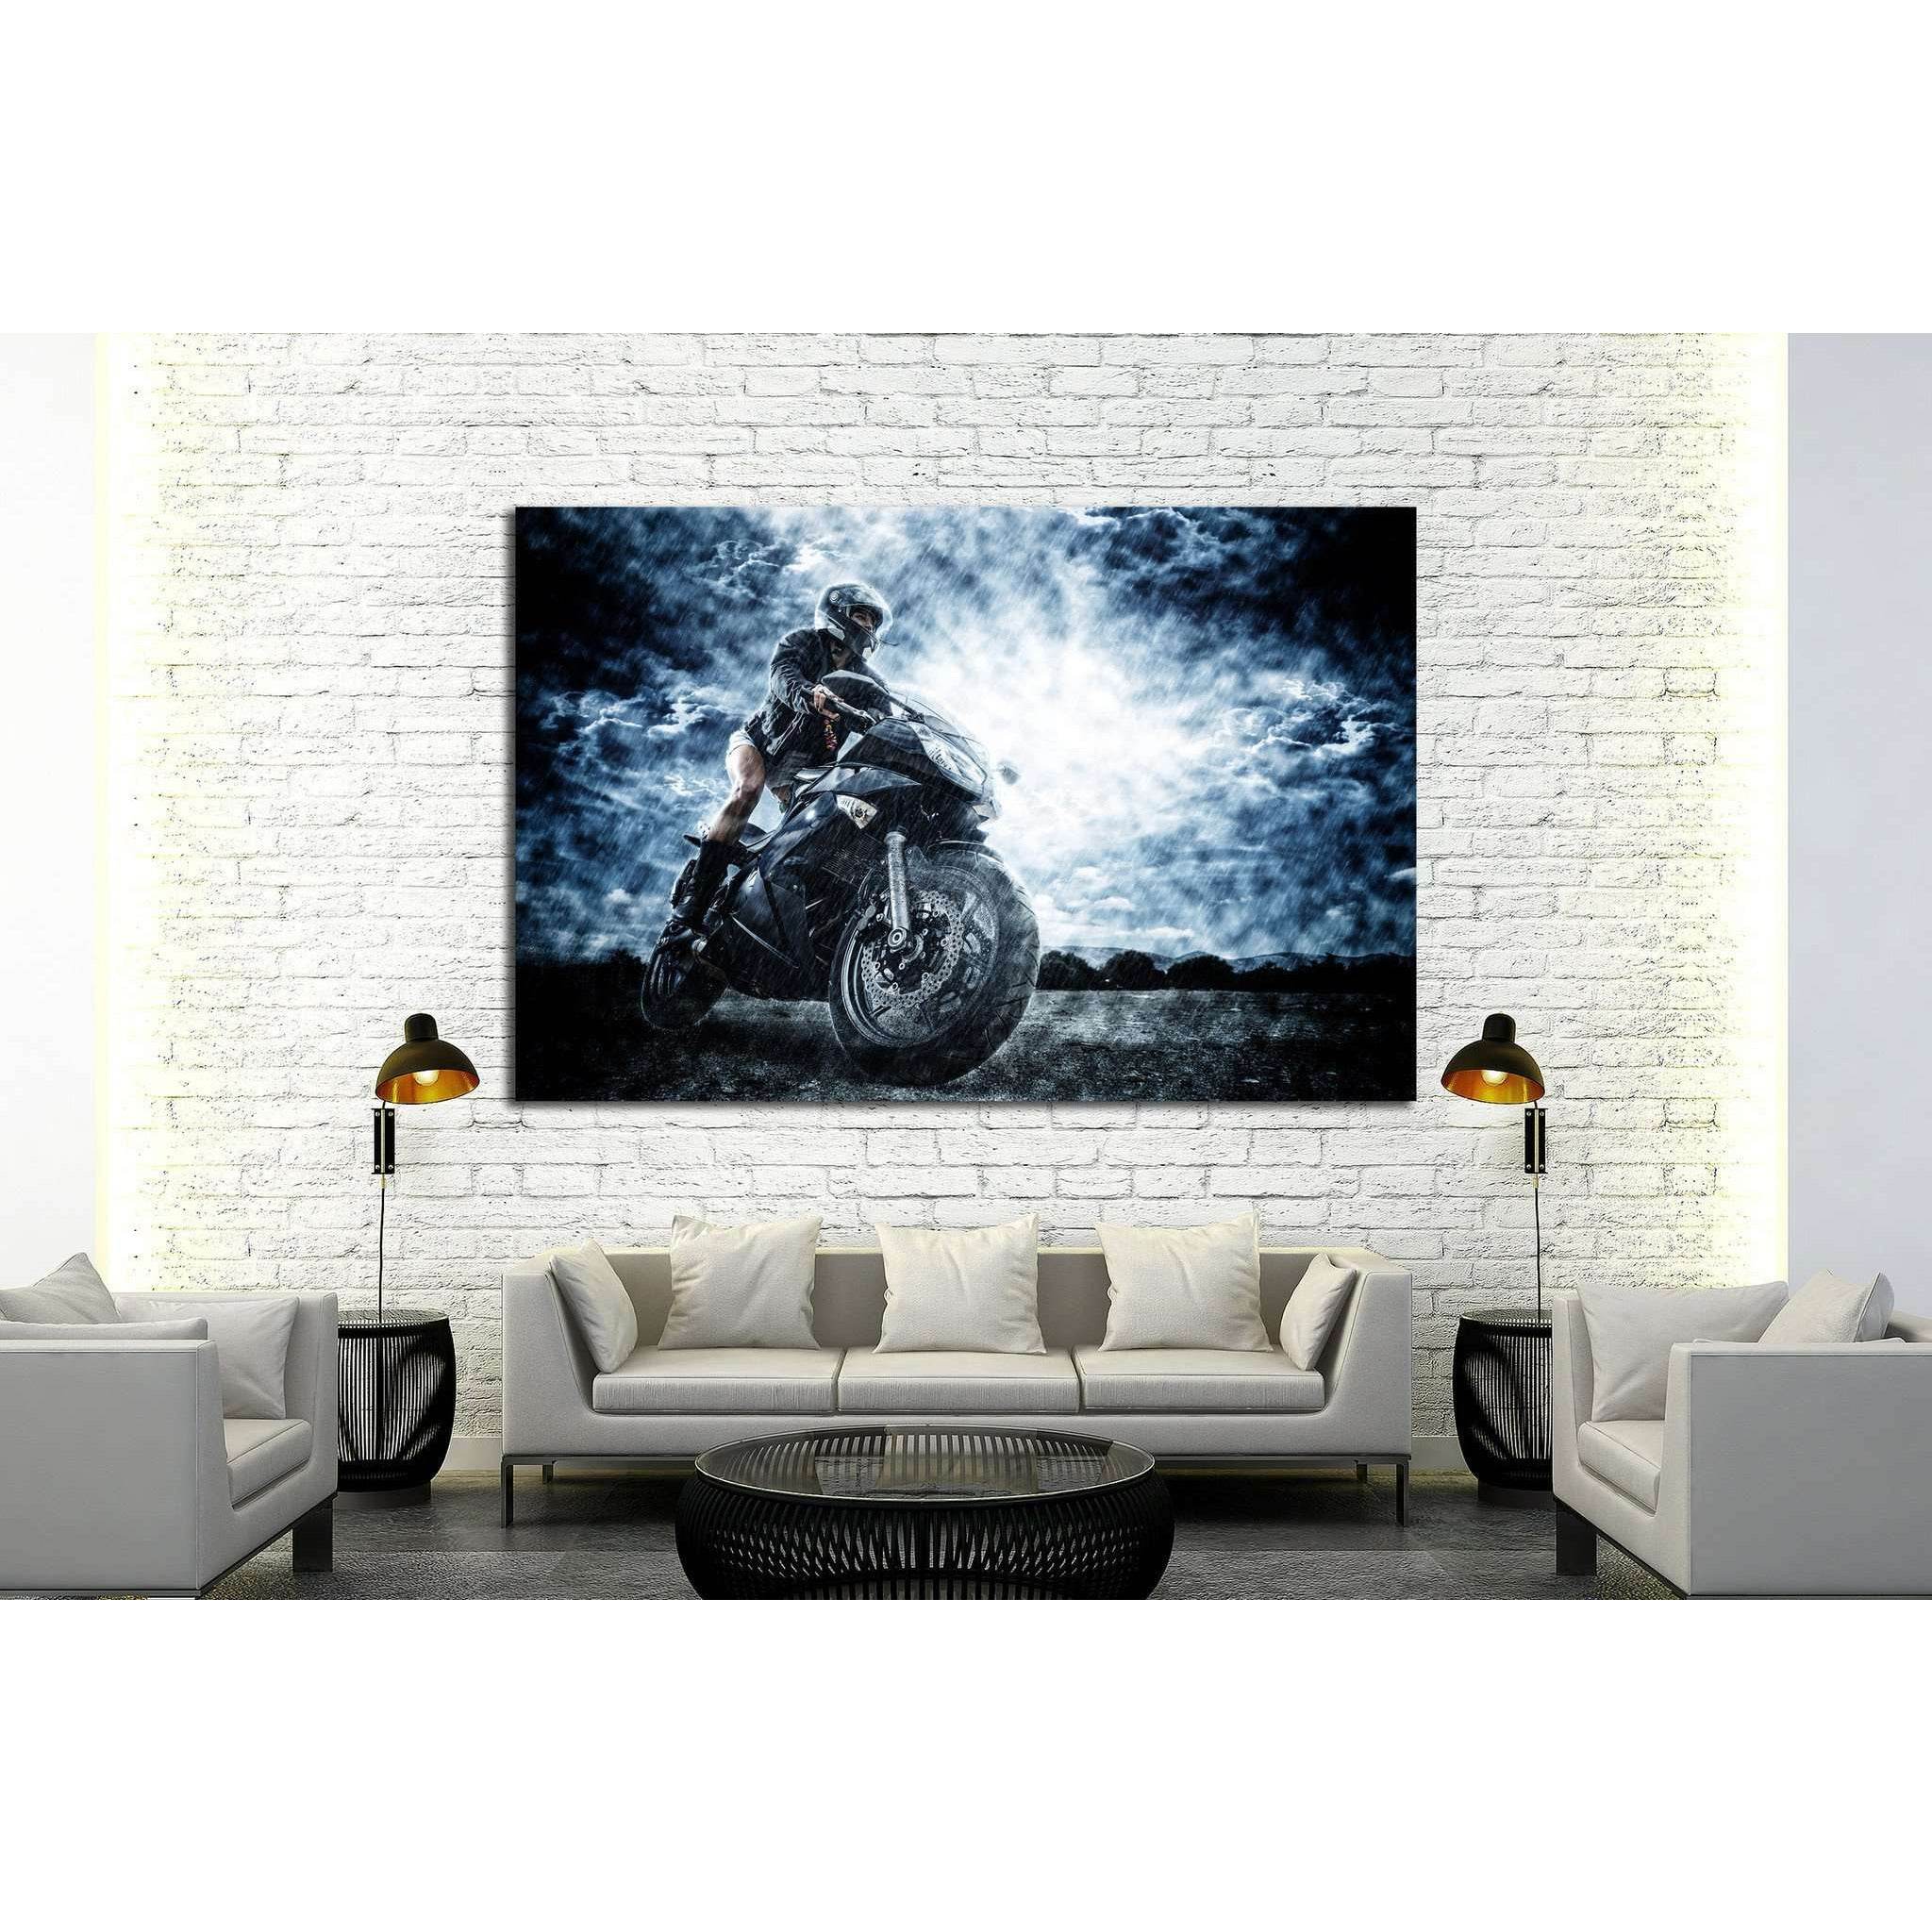 Sexy motorbike female rider №1869 Ready to Hang Canvas Print